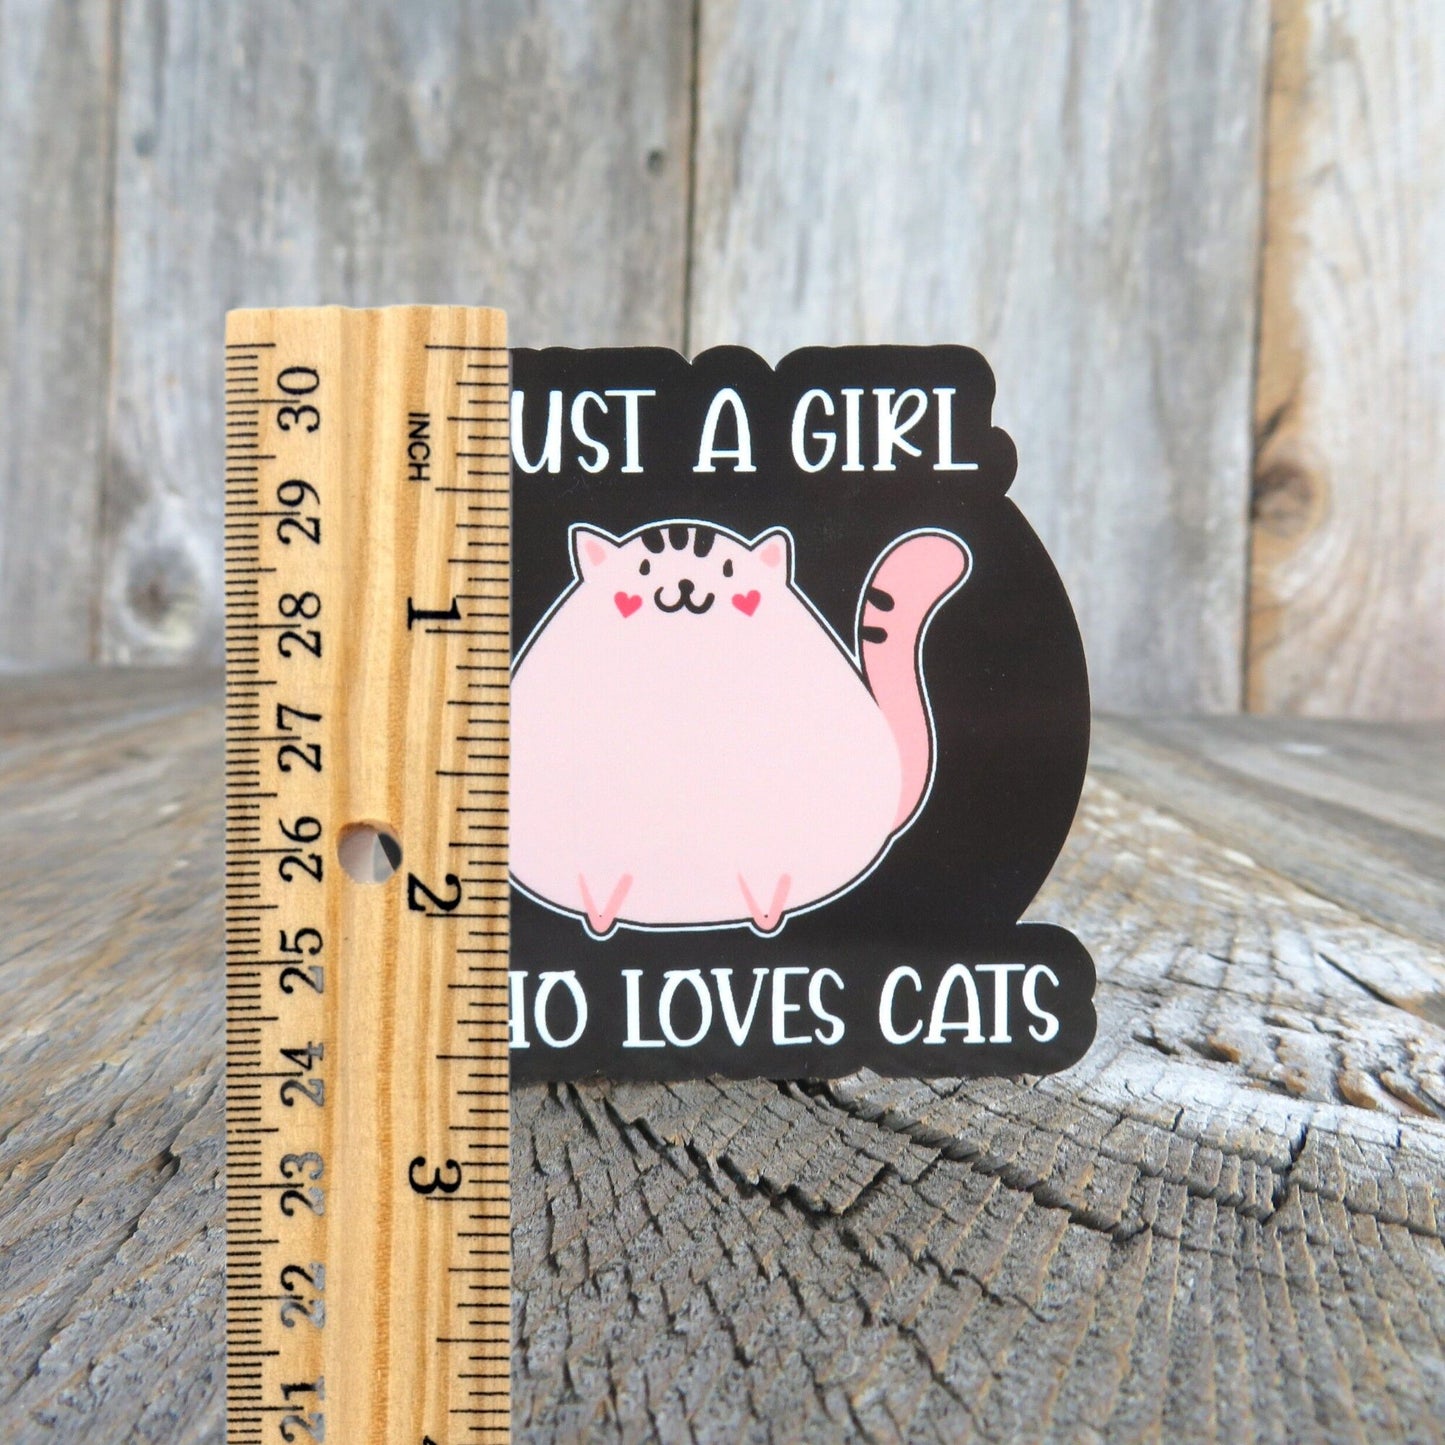 Just A Girl Who Loves Cats Sticker Funny Pink Kitten Full Color Waterproof Cat Lover Humor Sticker